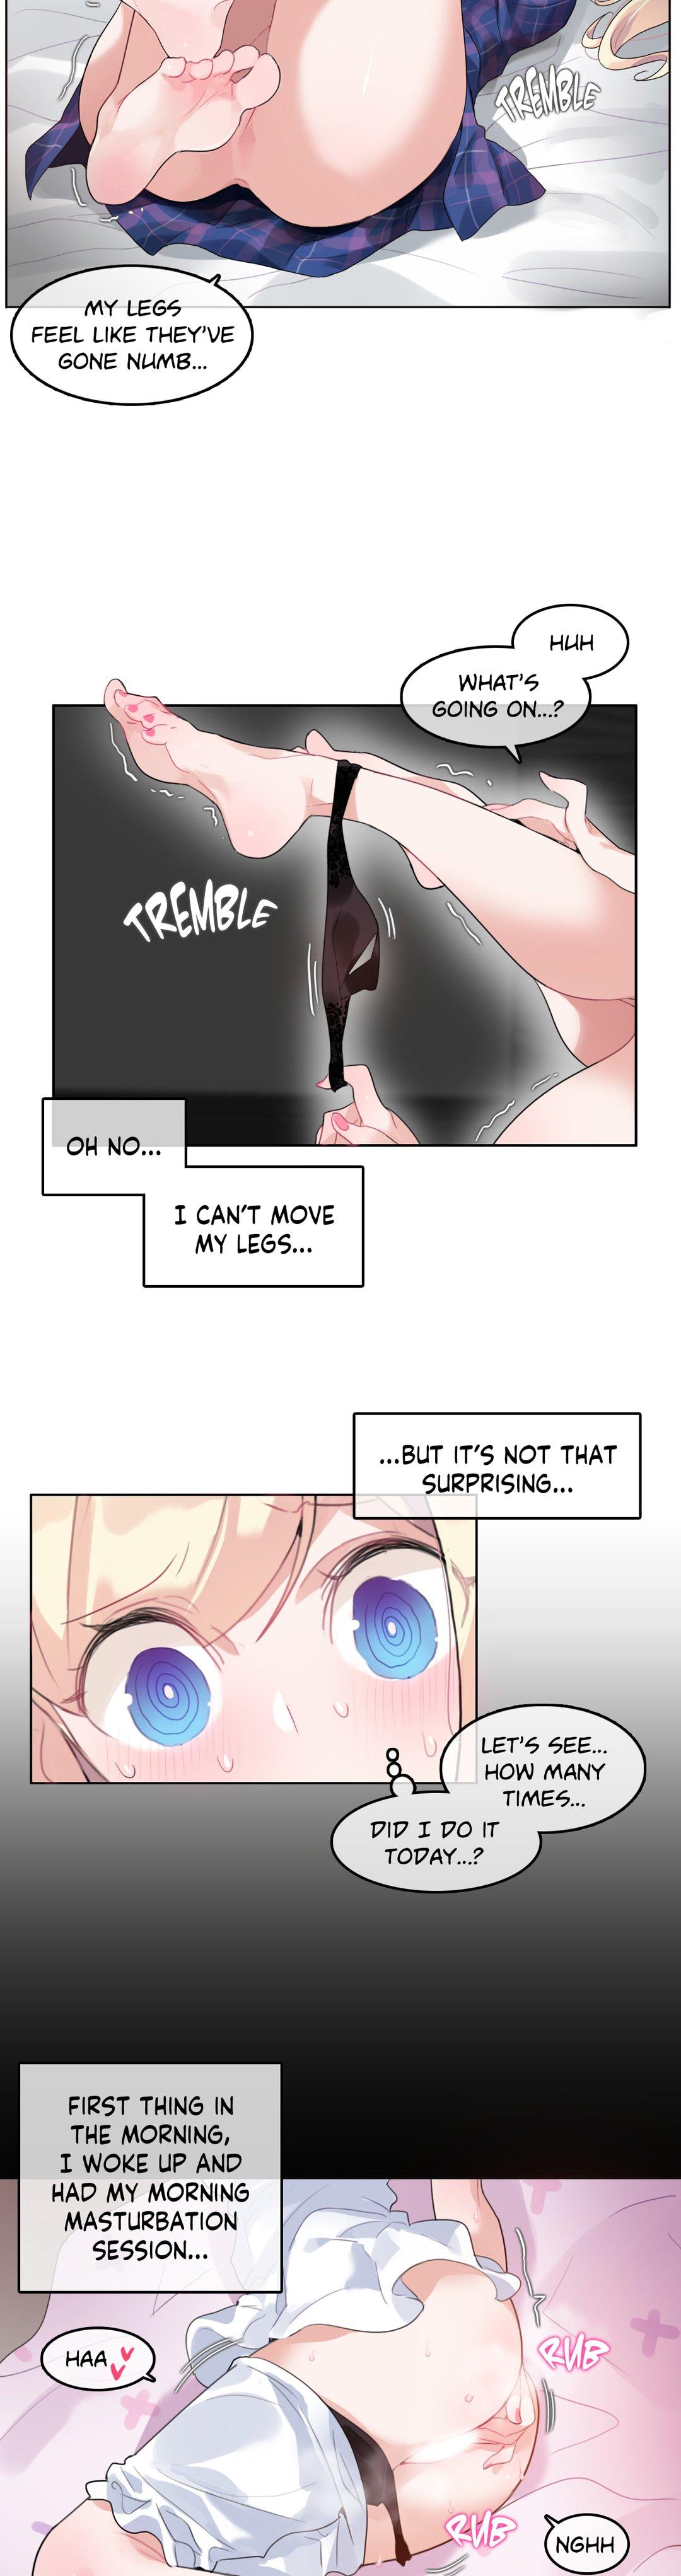 A Pervert's Daily Life • Chapter 41-45 84